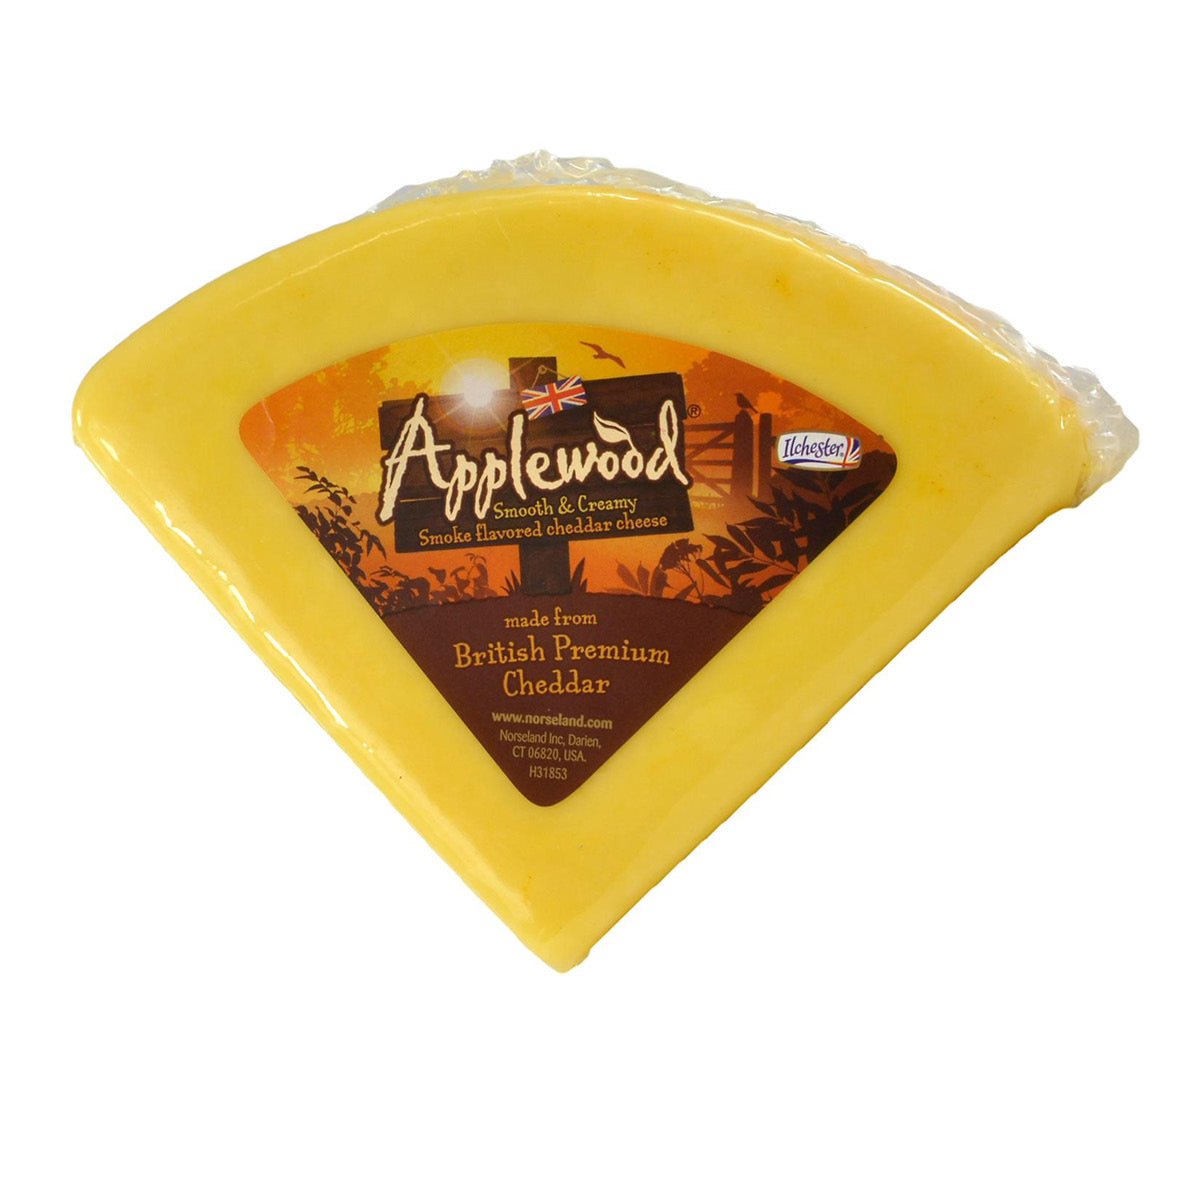 Ilchester Applewood Smoked Cheddar Wedge, 150g